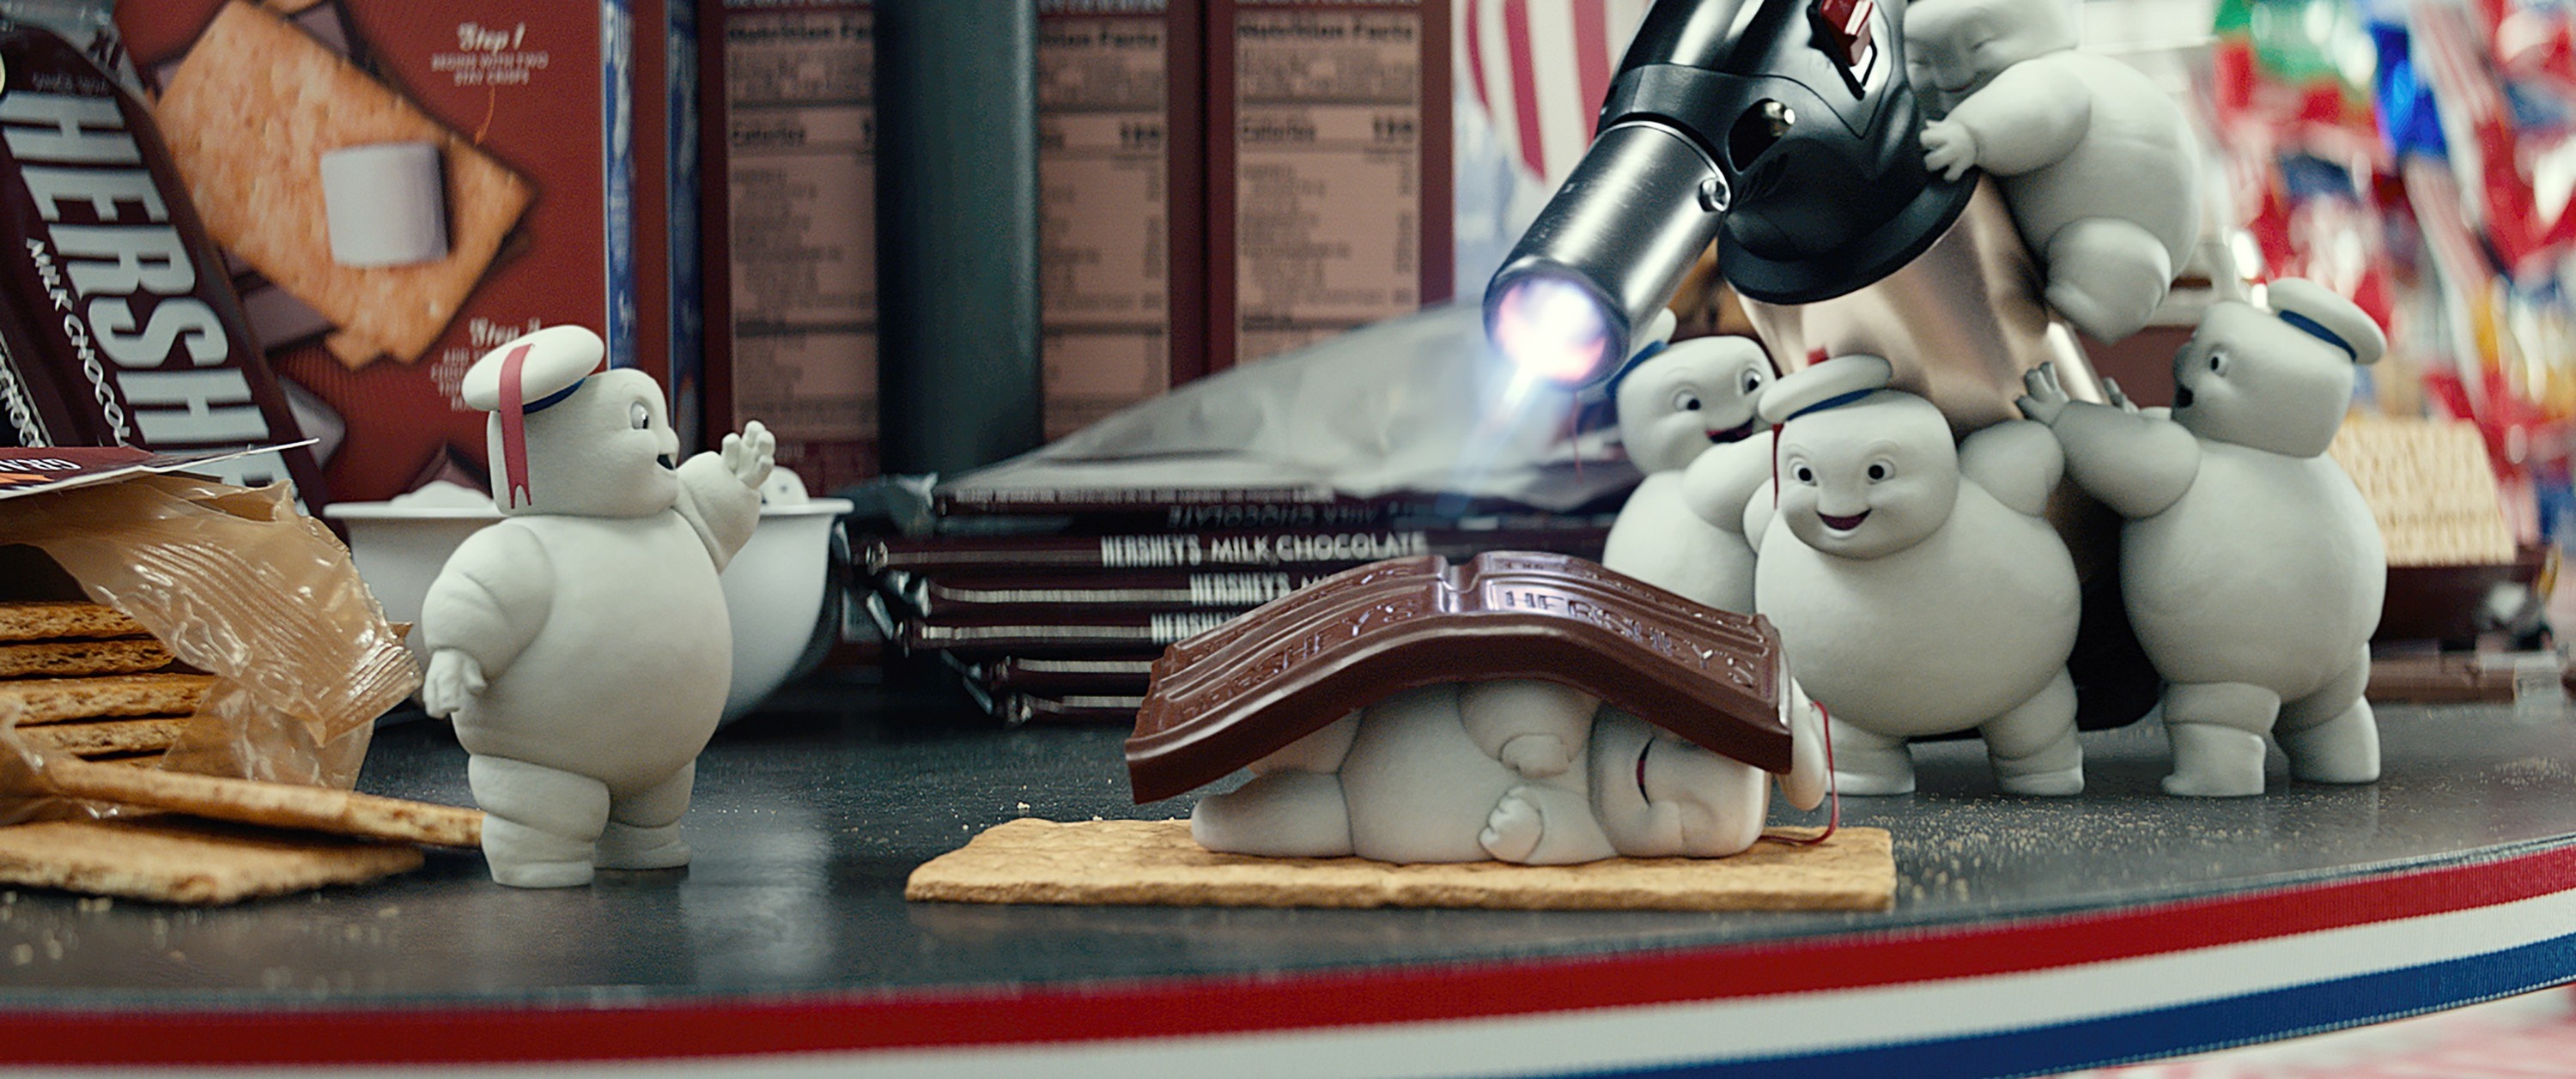 Tiny Stay Puft marshmallow men, making smores out of their own bodies